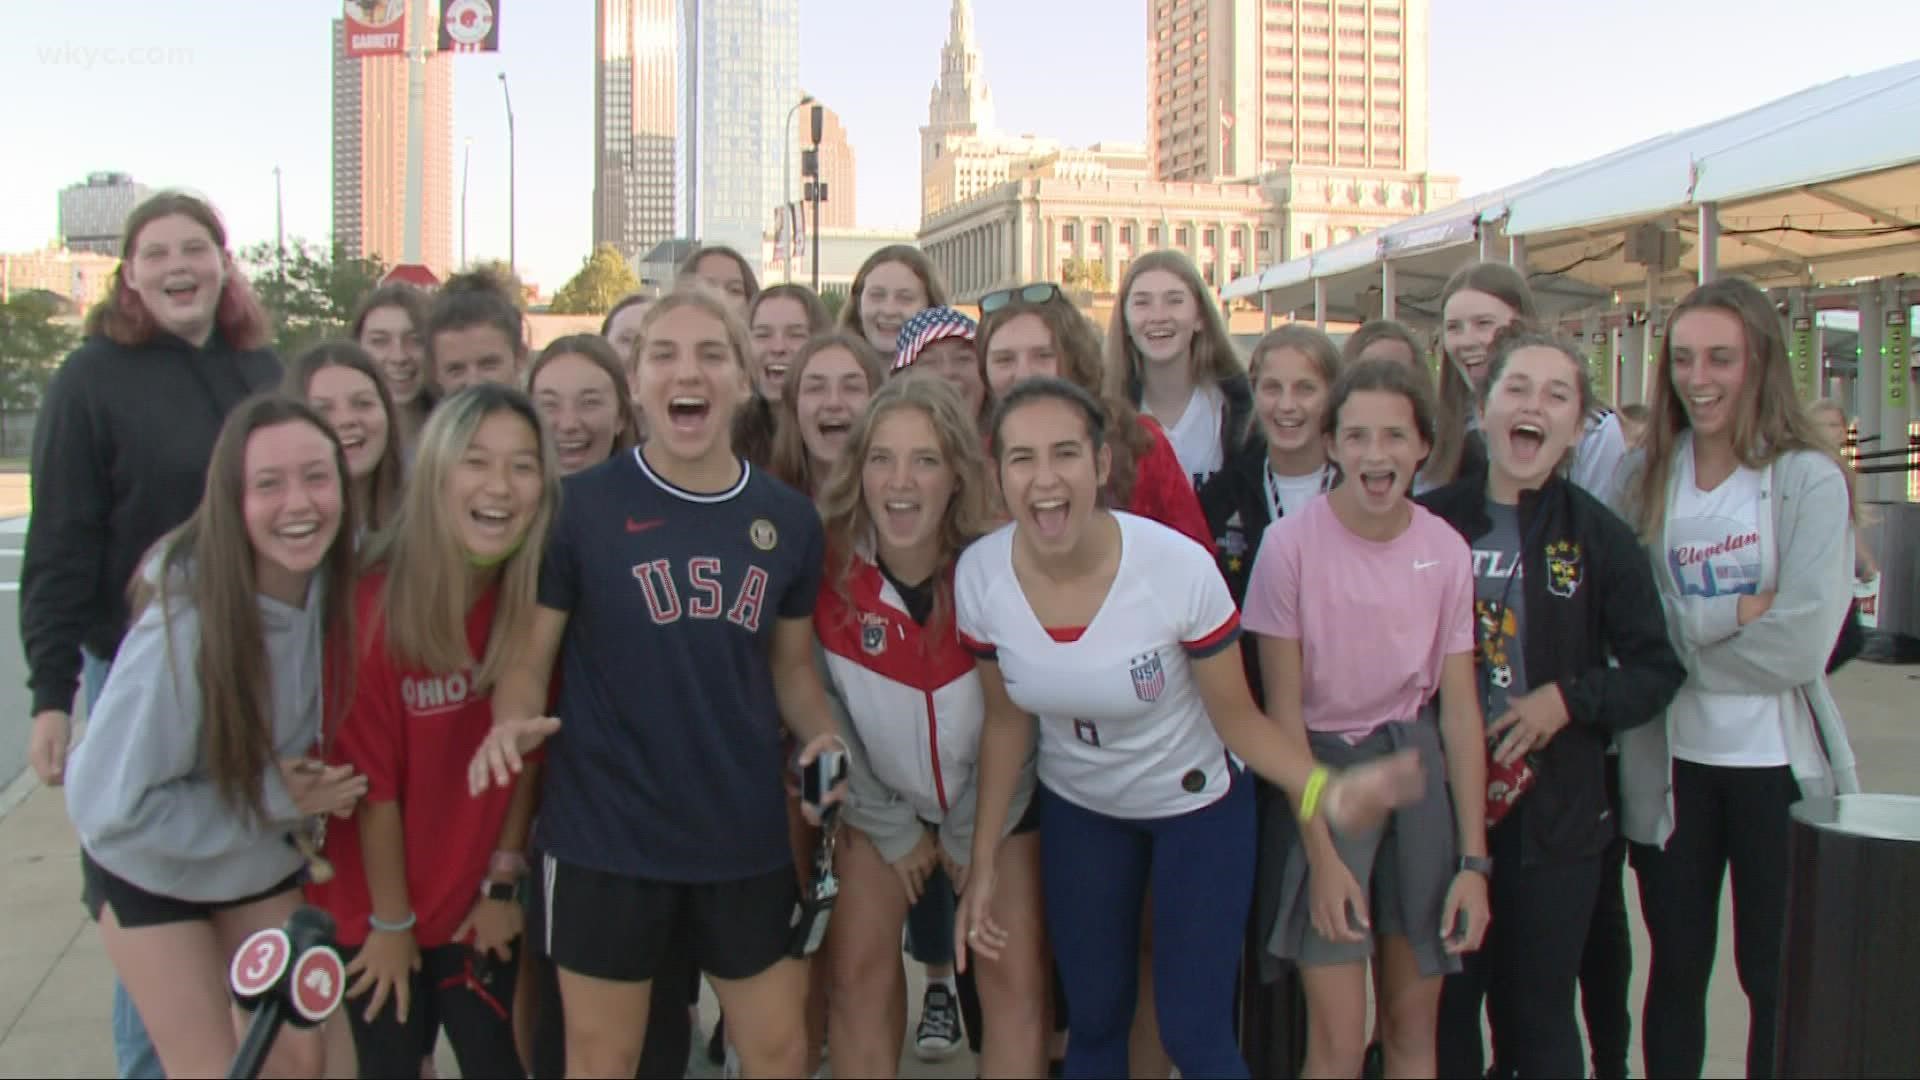 Fans of the USWNT showed up in Cleveland Tuesday to watch the team play. Will Ujek has the story.